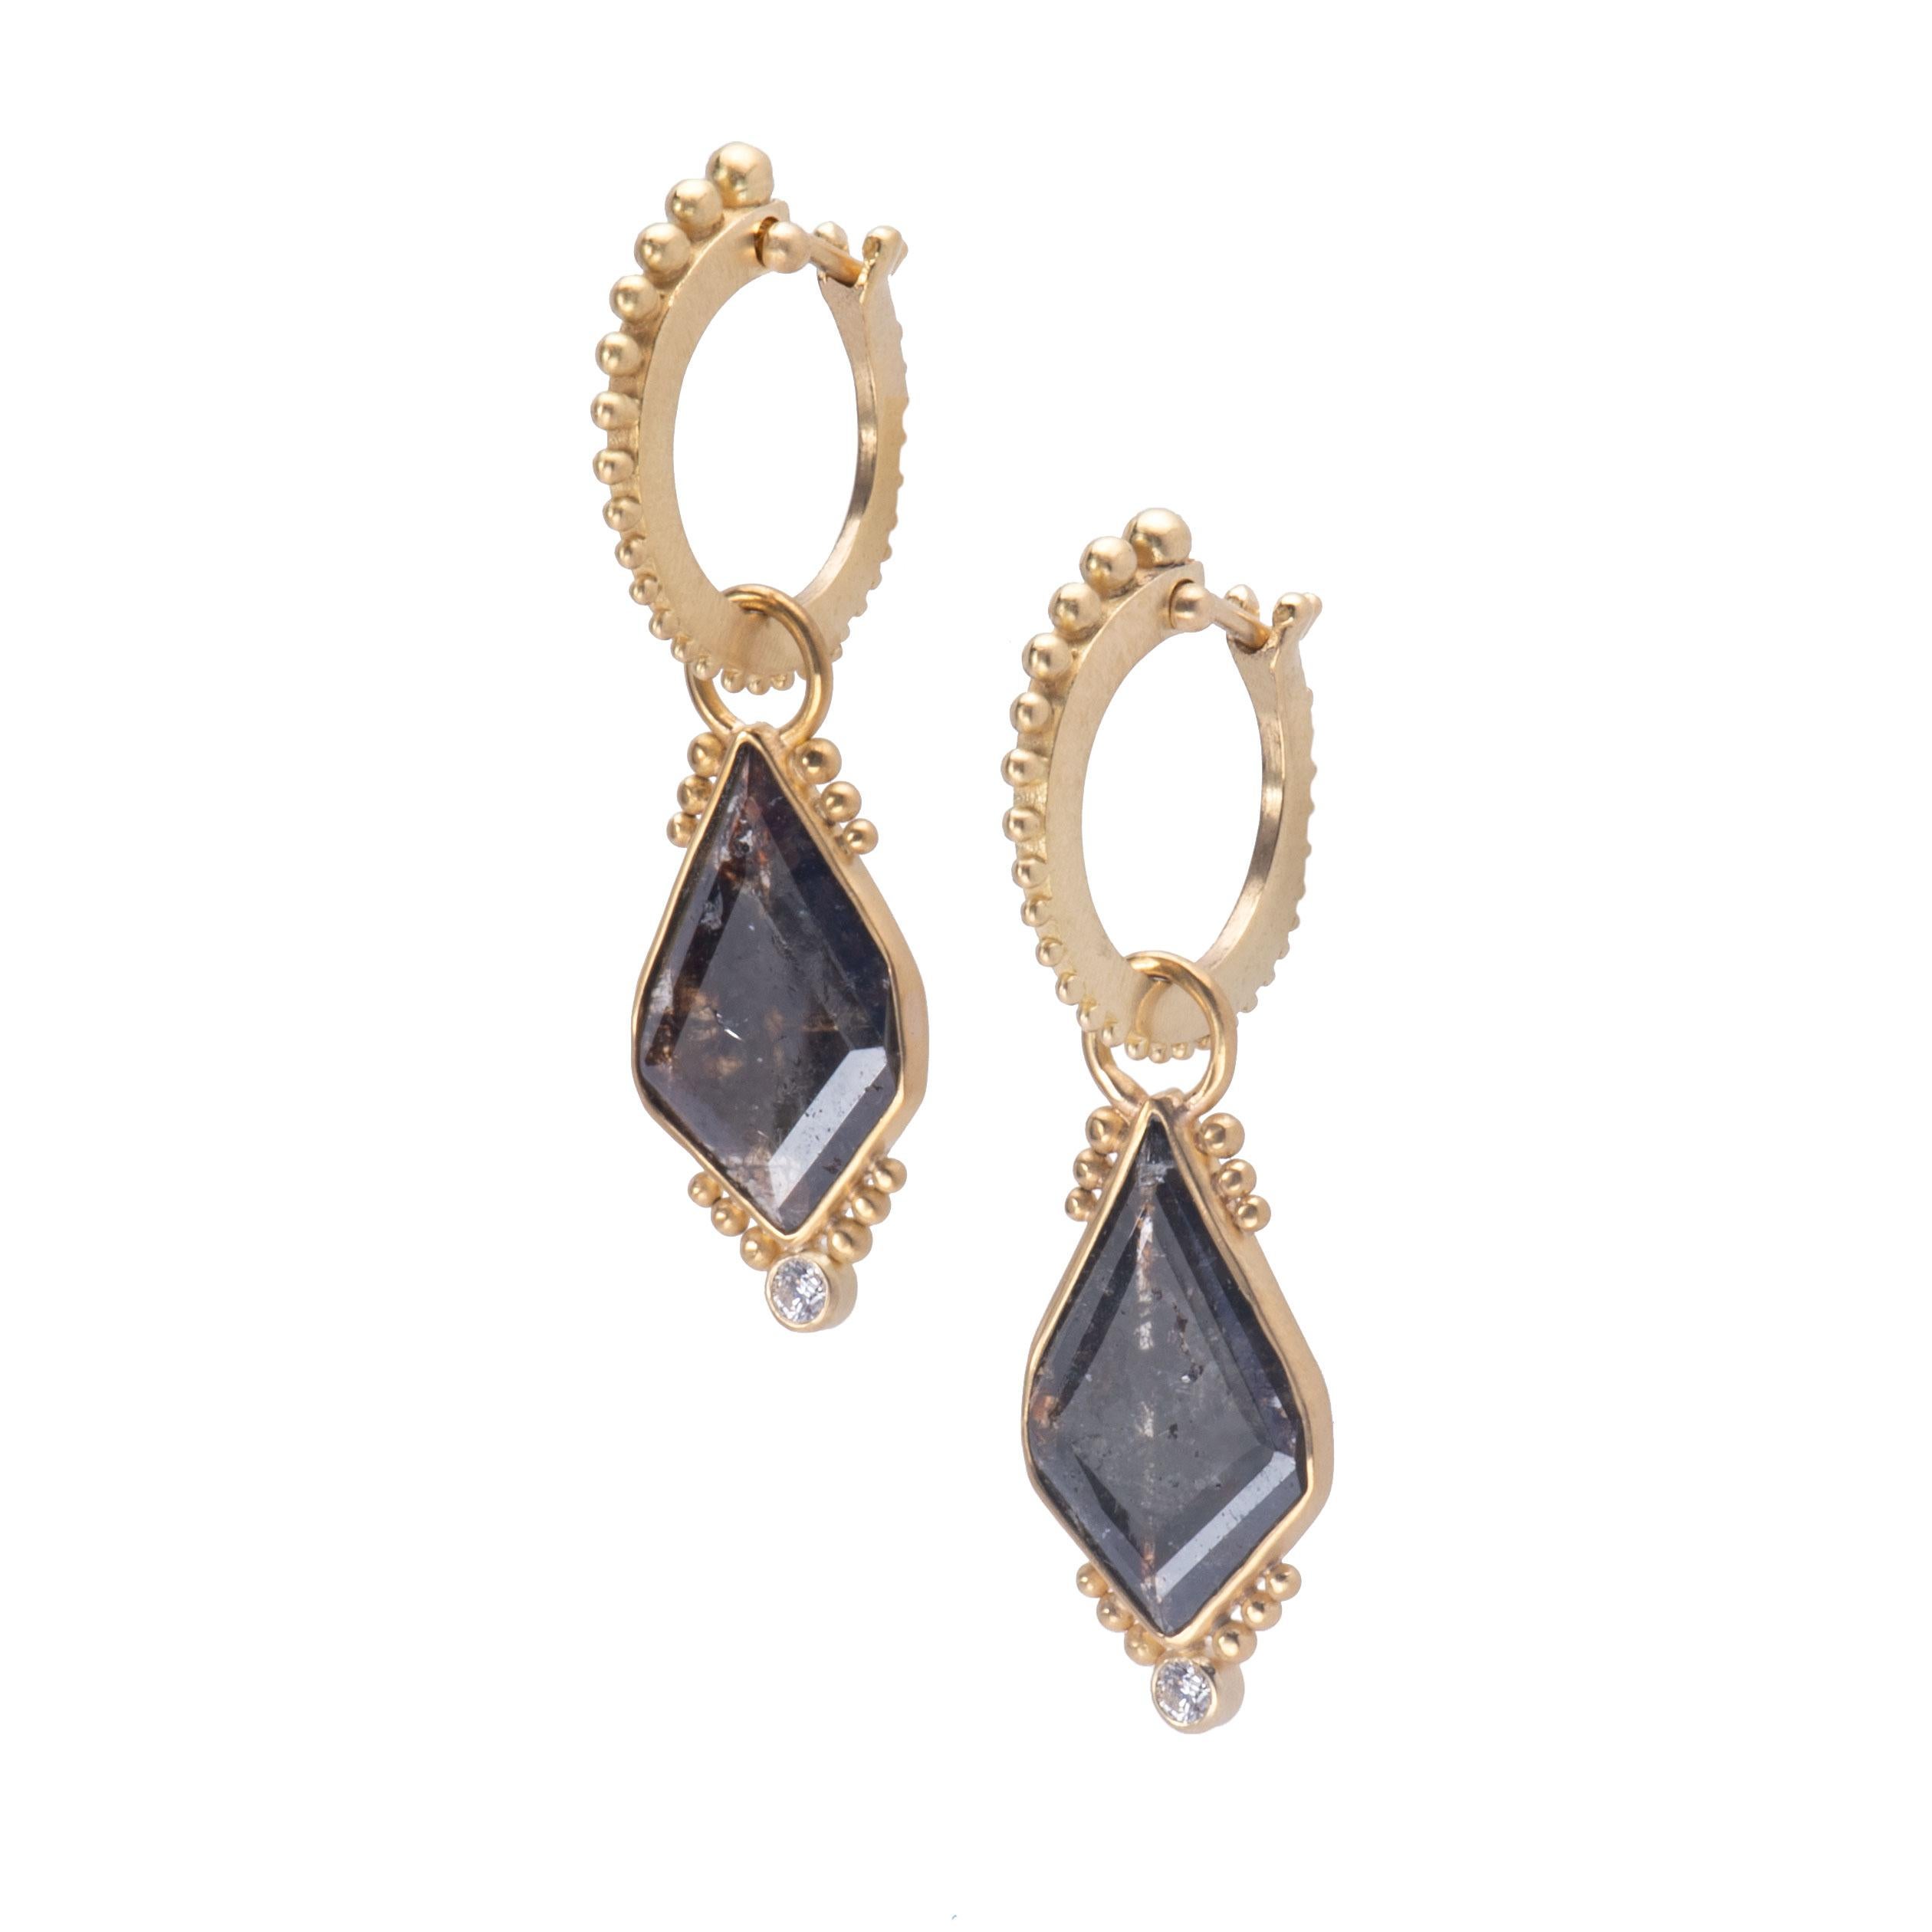 Deep Brown 5.54tcw rose cut diamonds in irregular diamond shapes are bezel set and framed with beading and white diamond points. Handcrafted in 22k gold, the Titania Drops are suspended from our large narrow beaded hoops in 18k gold and are 1.63 in